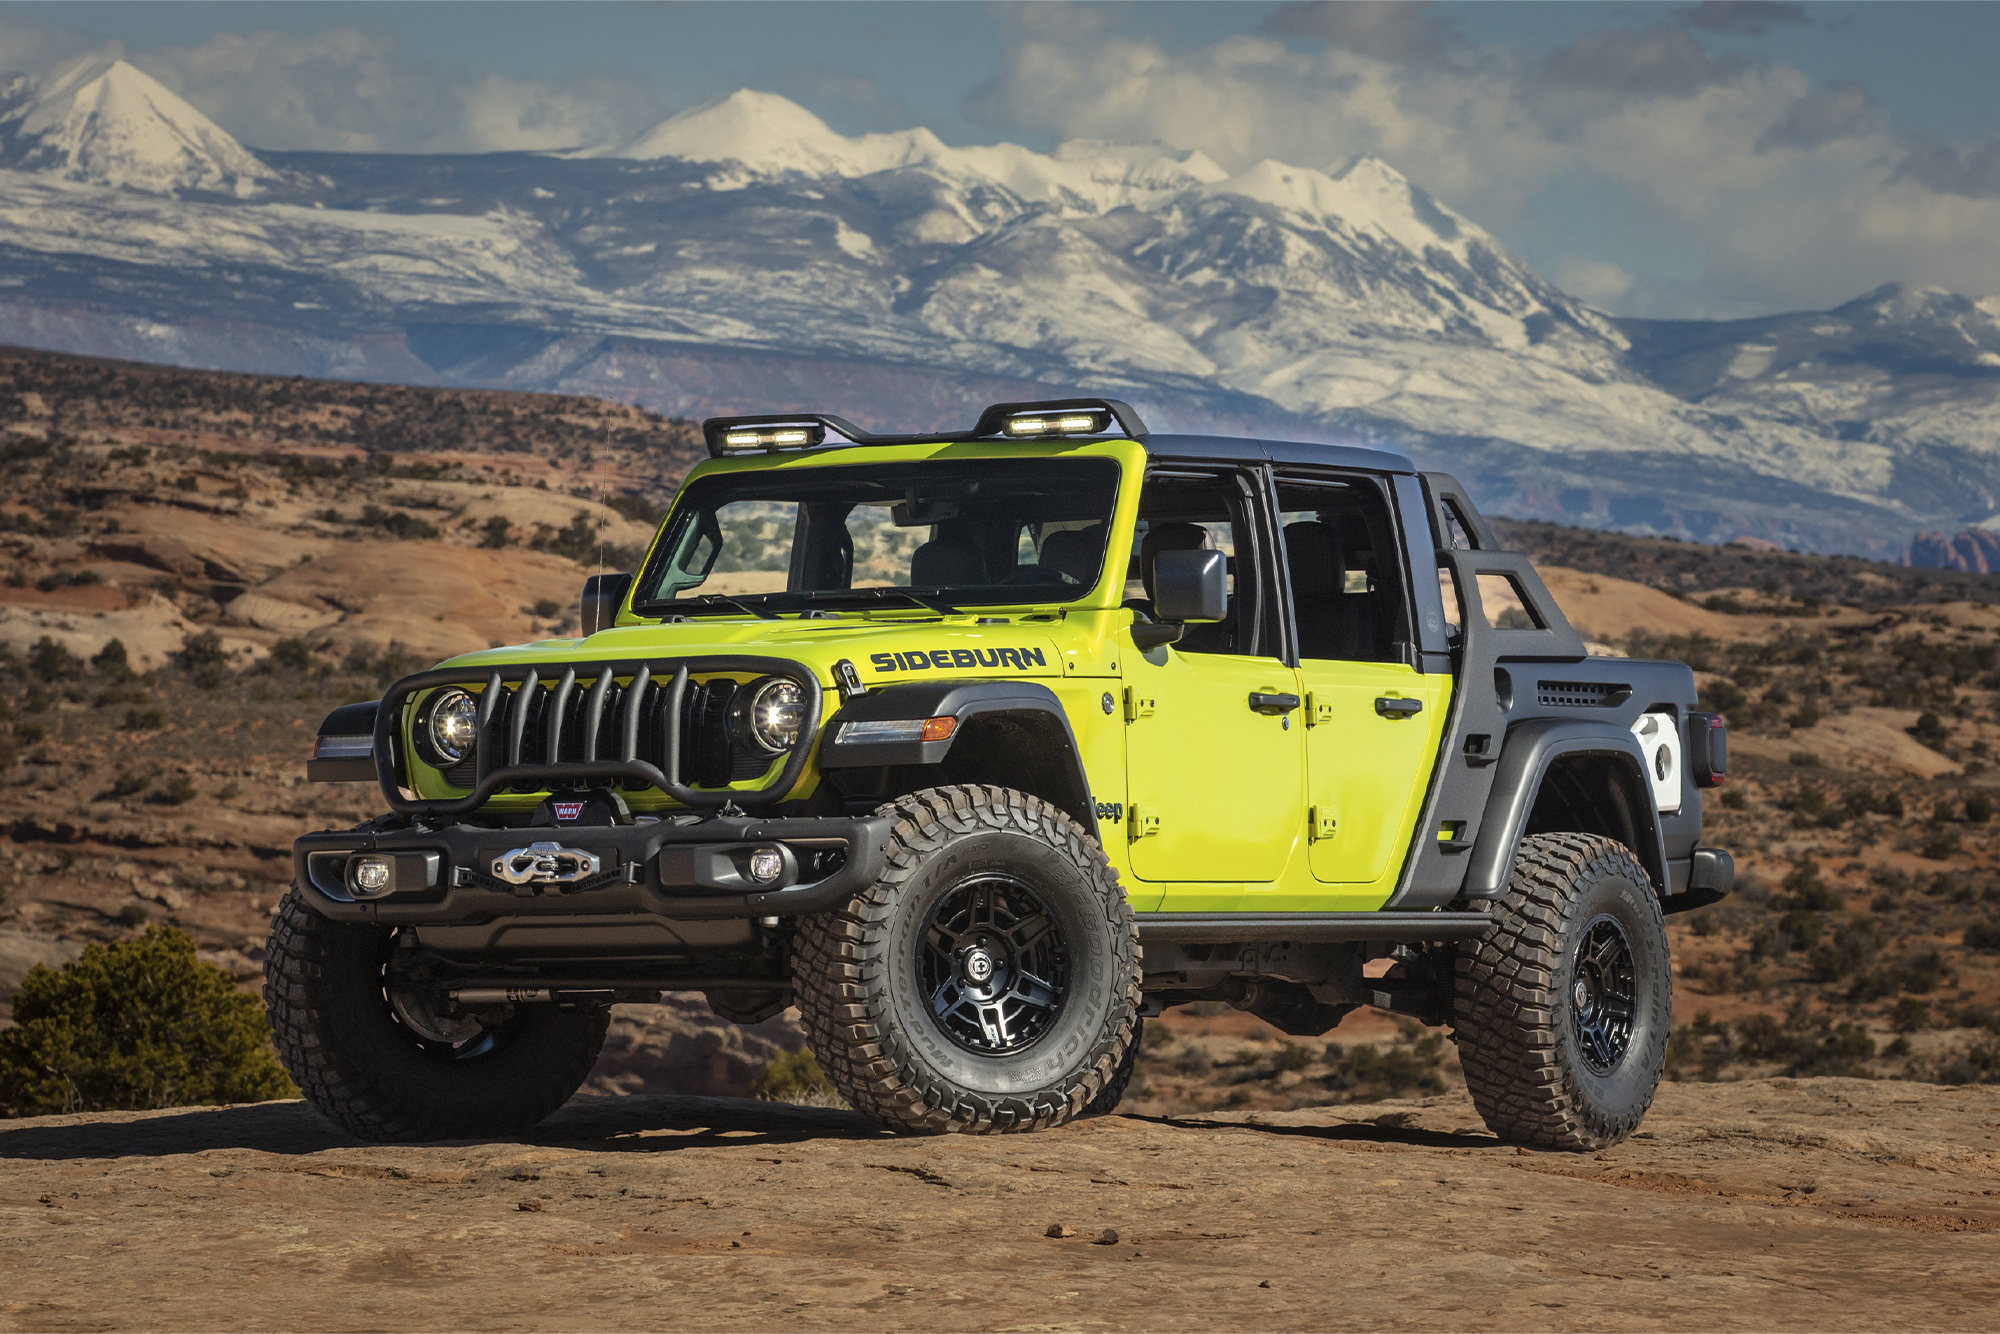 Jeep Gladiator Rubicon Sideburn Concept front view